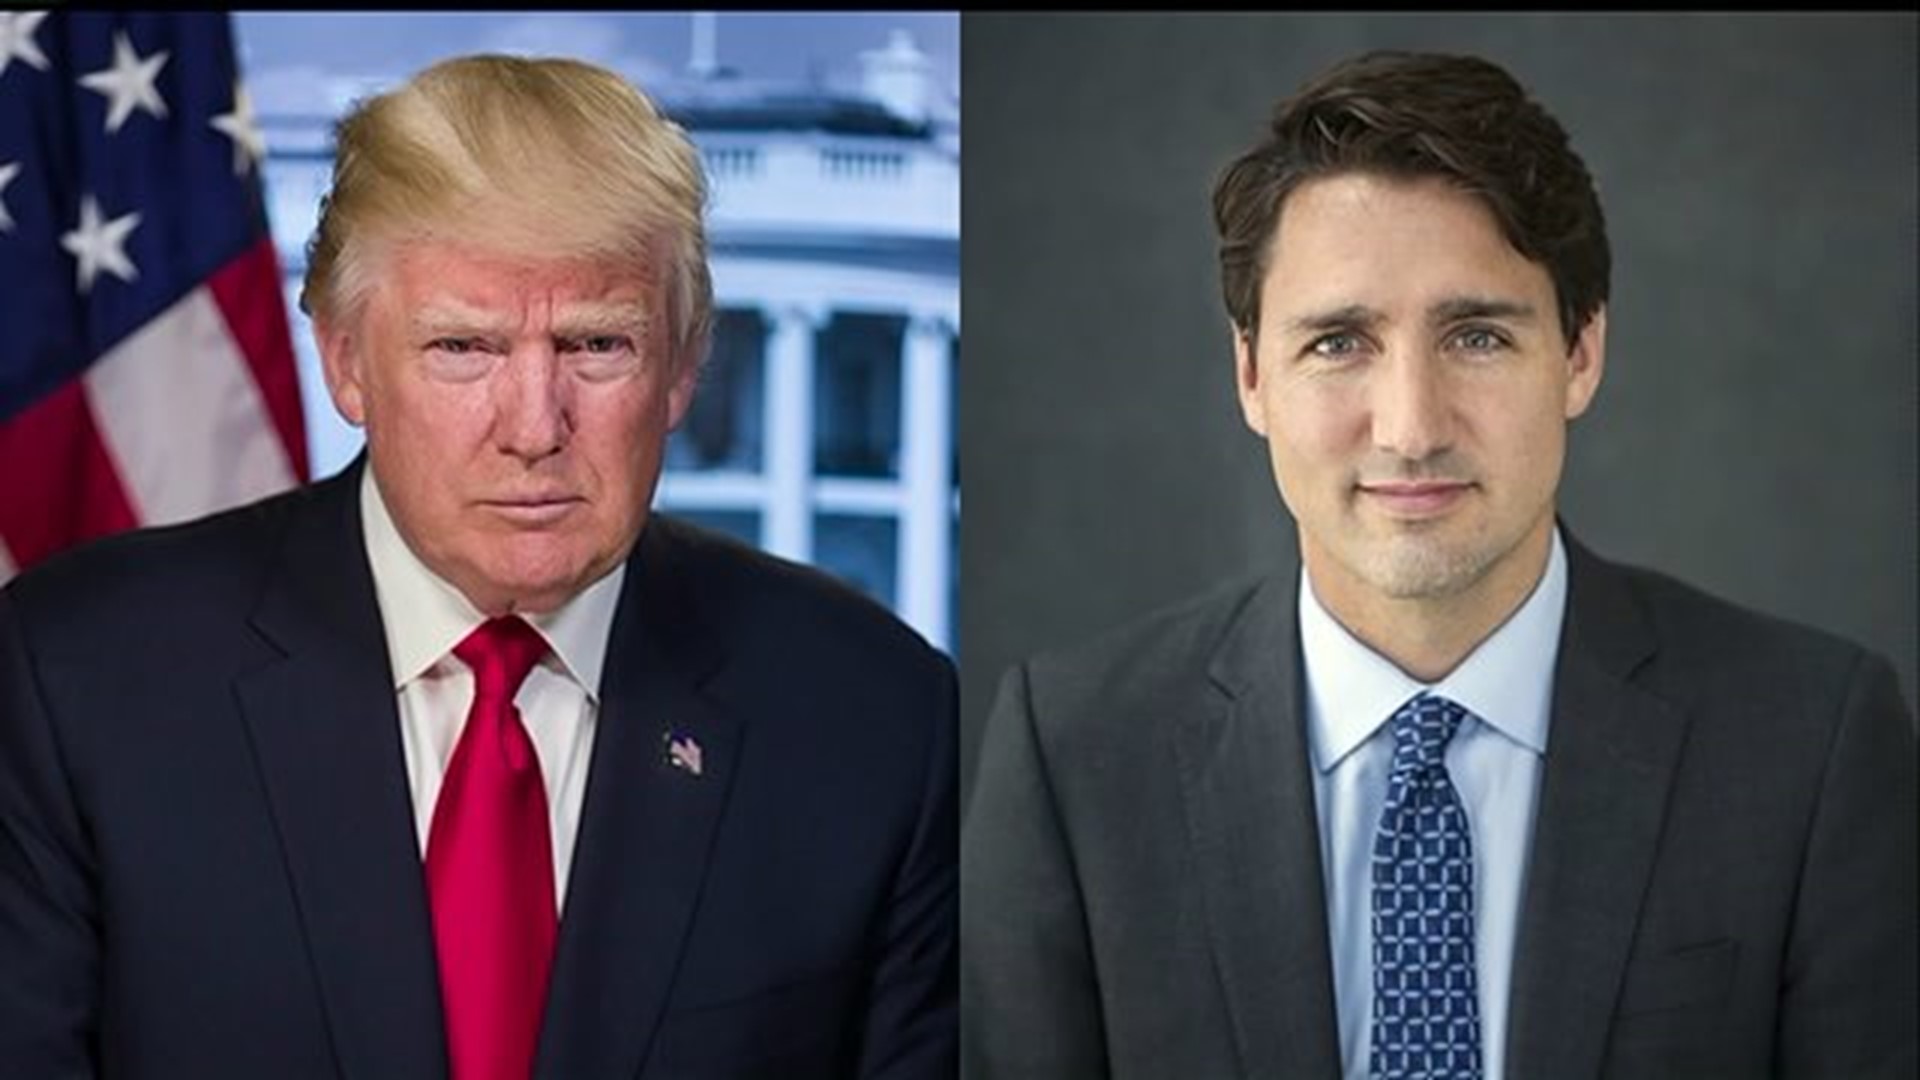 Trump to meet with Trudeau